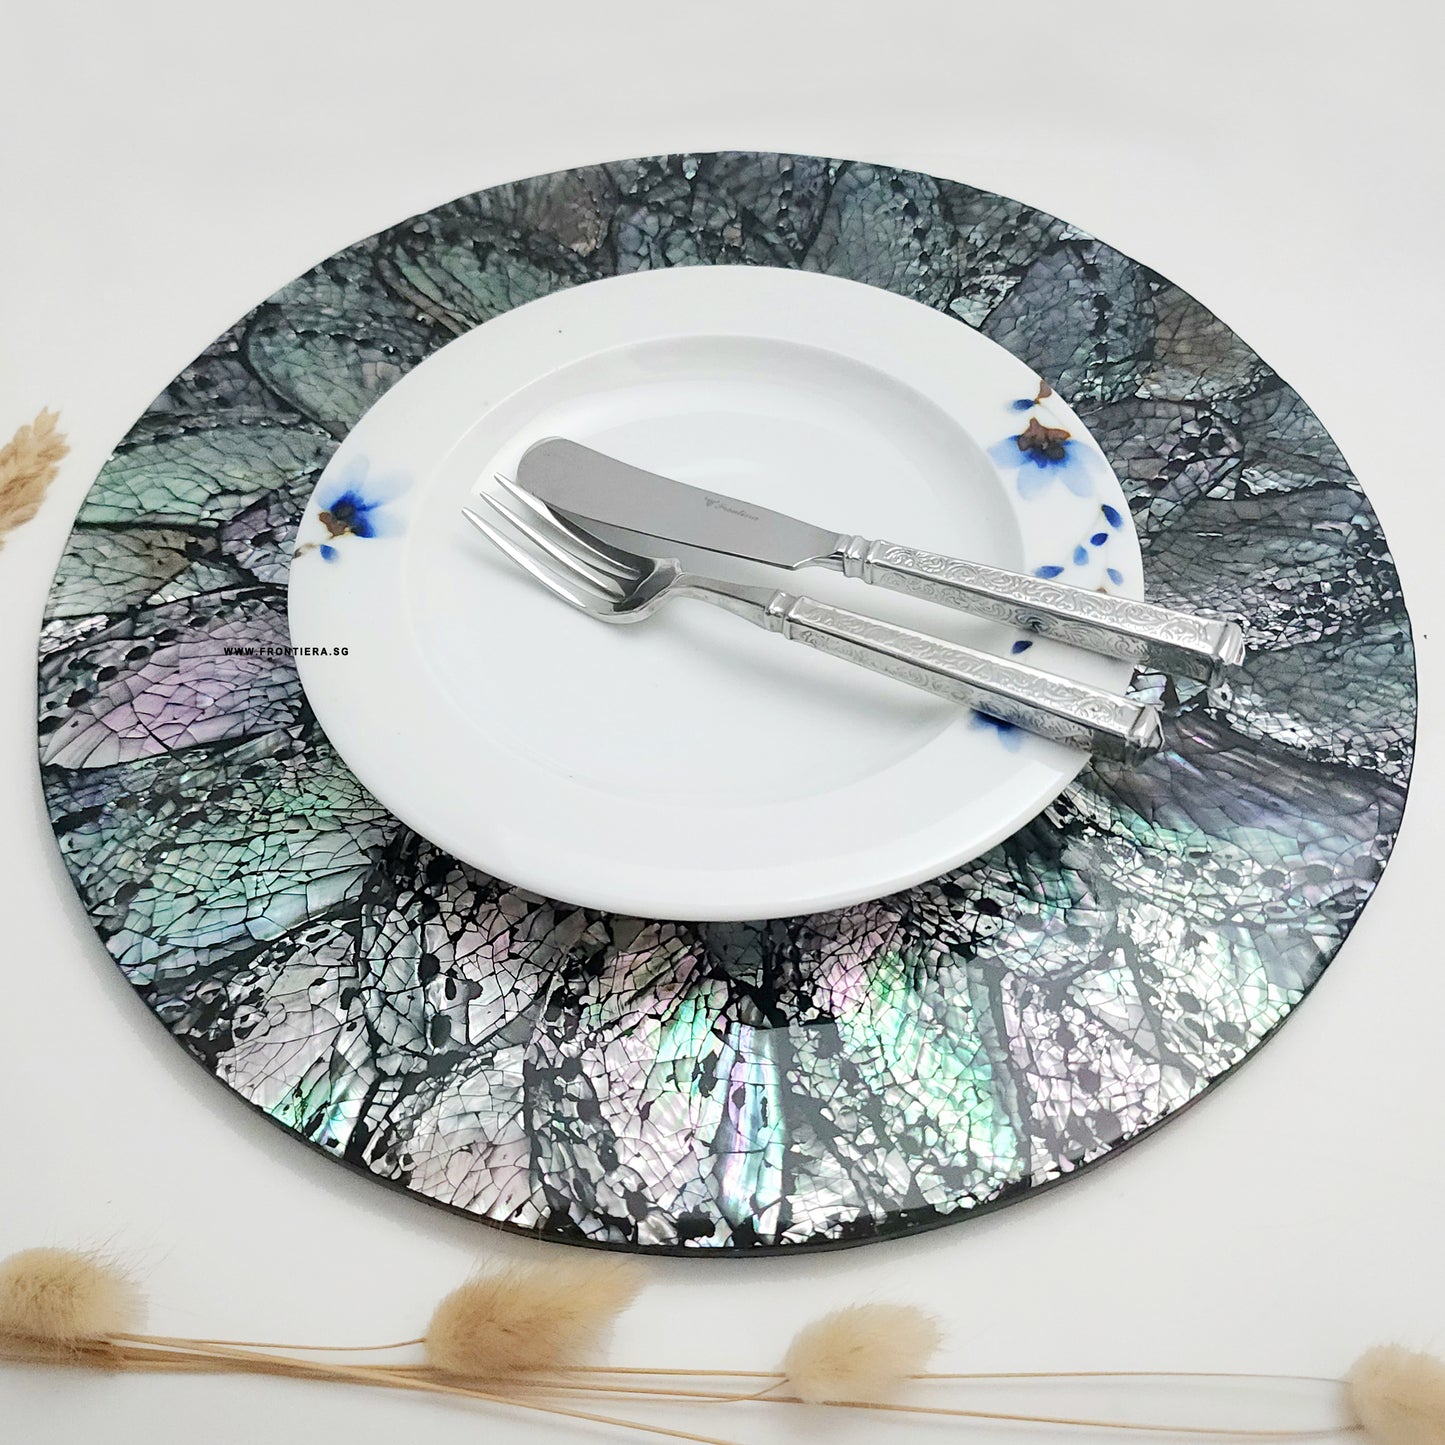 Black Abalone Shell Inlayed 30cm Round Placemats / Tablemats